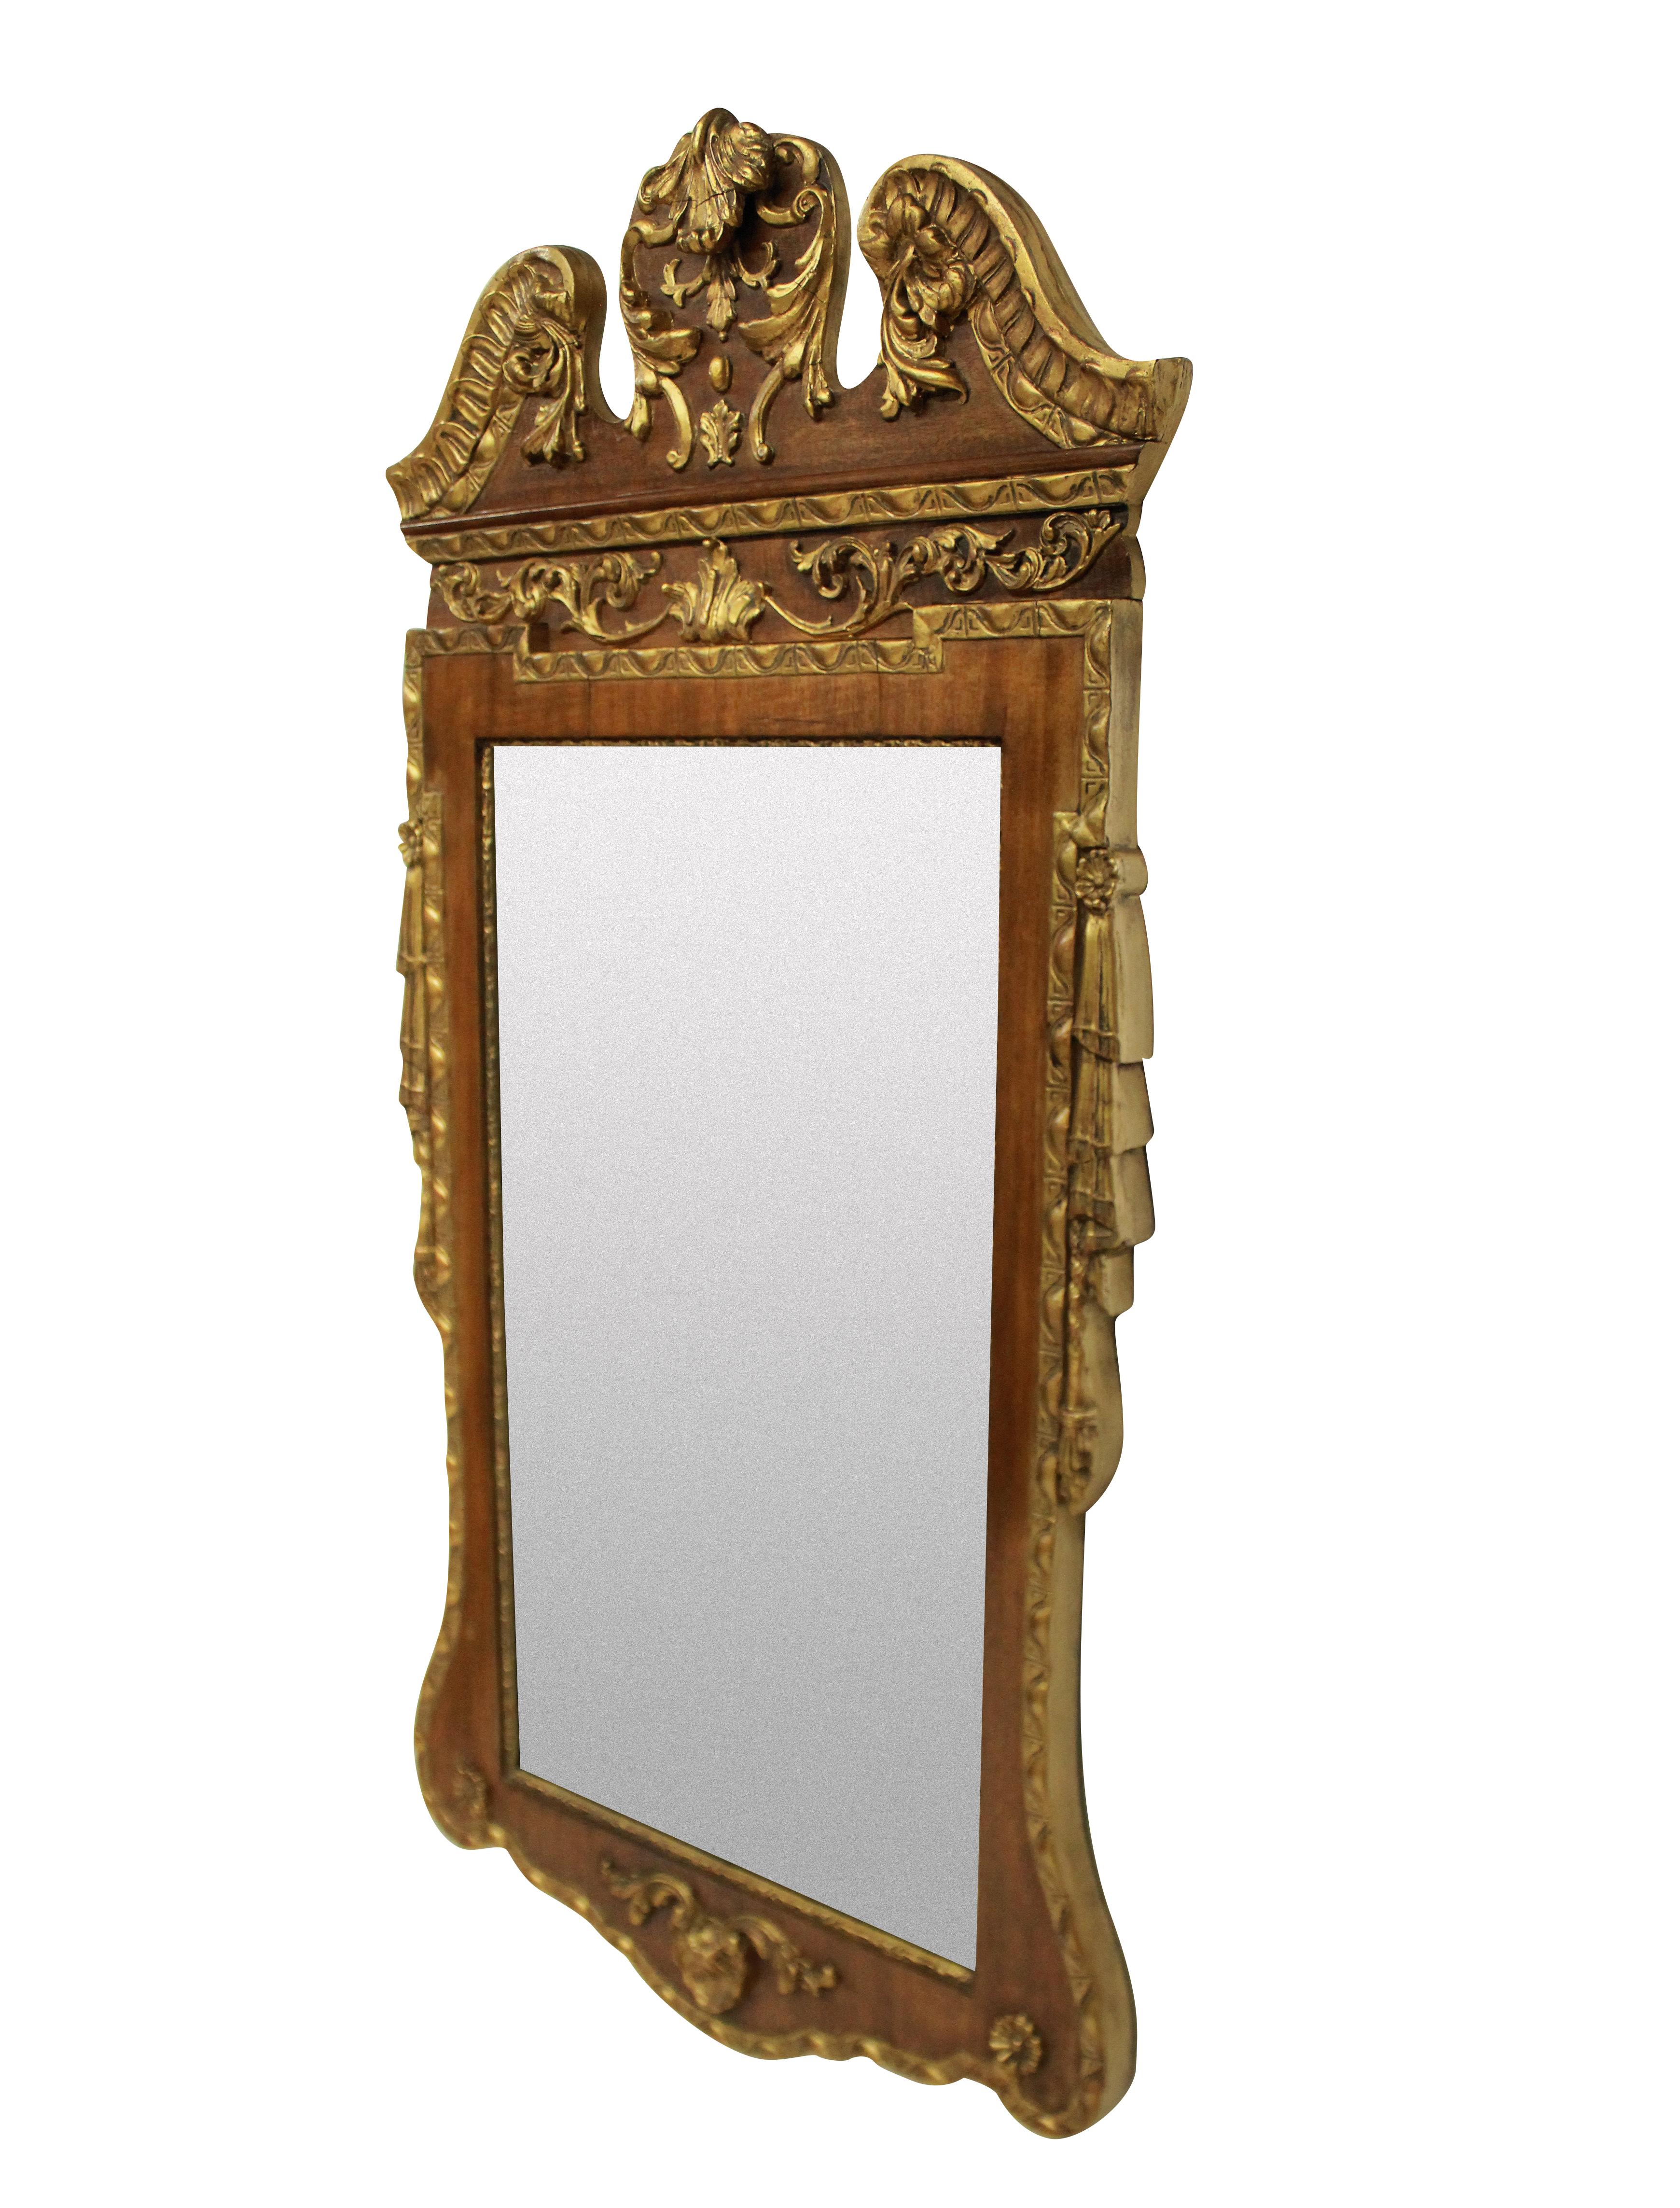 An English George II style carved walnut and gilded mirror.